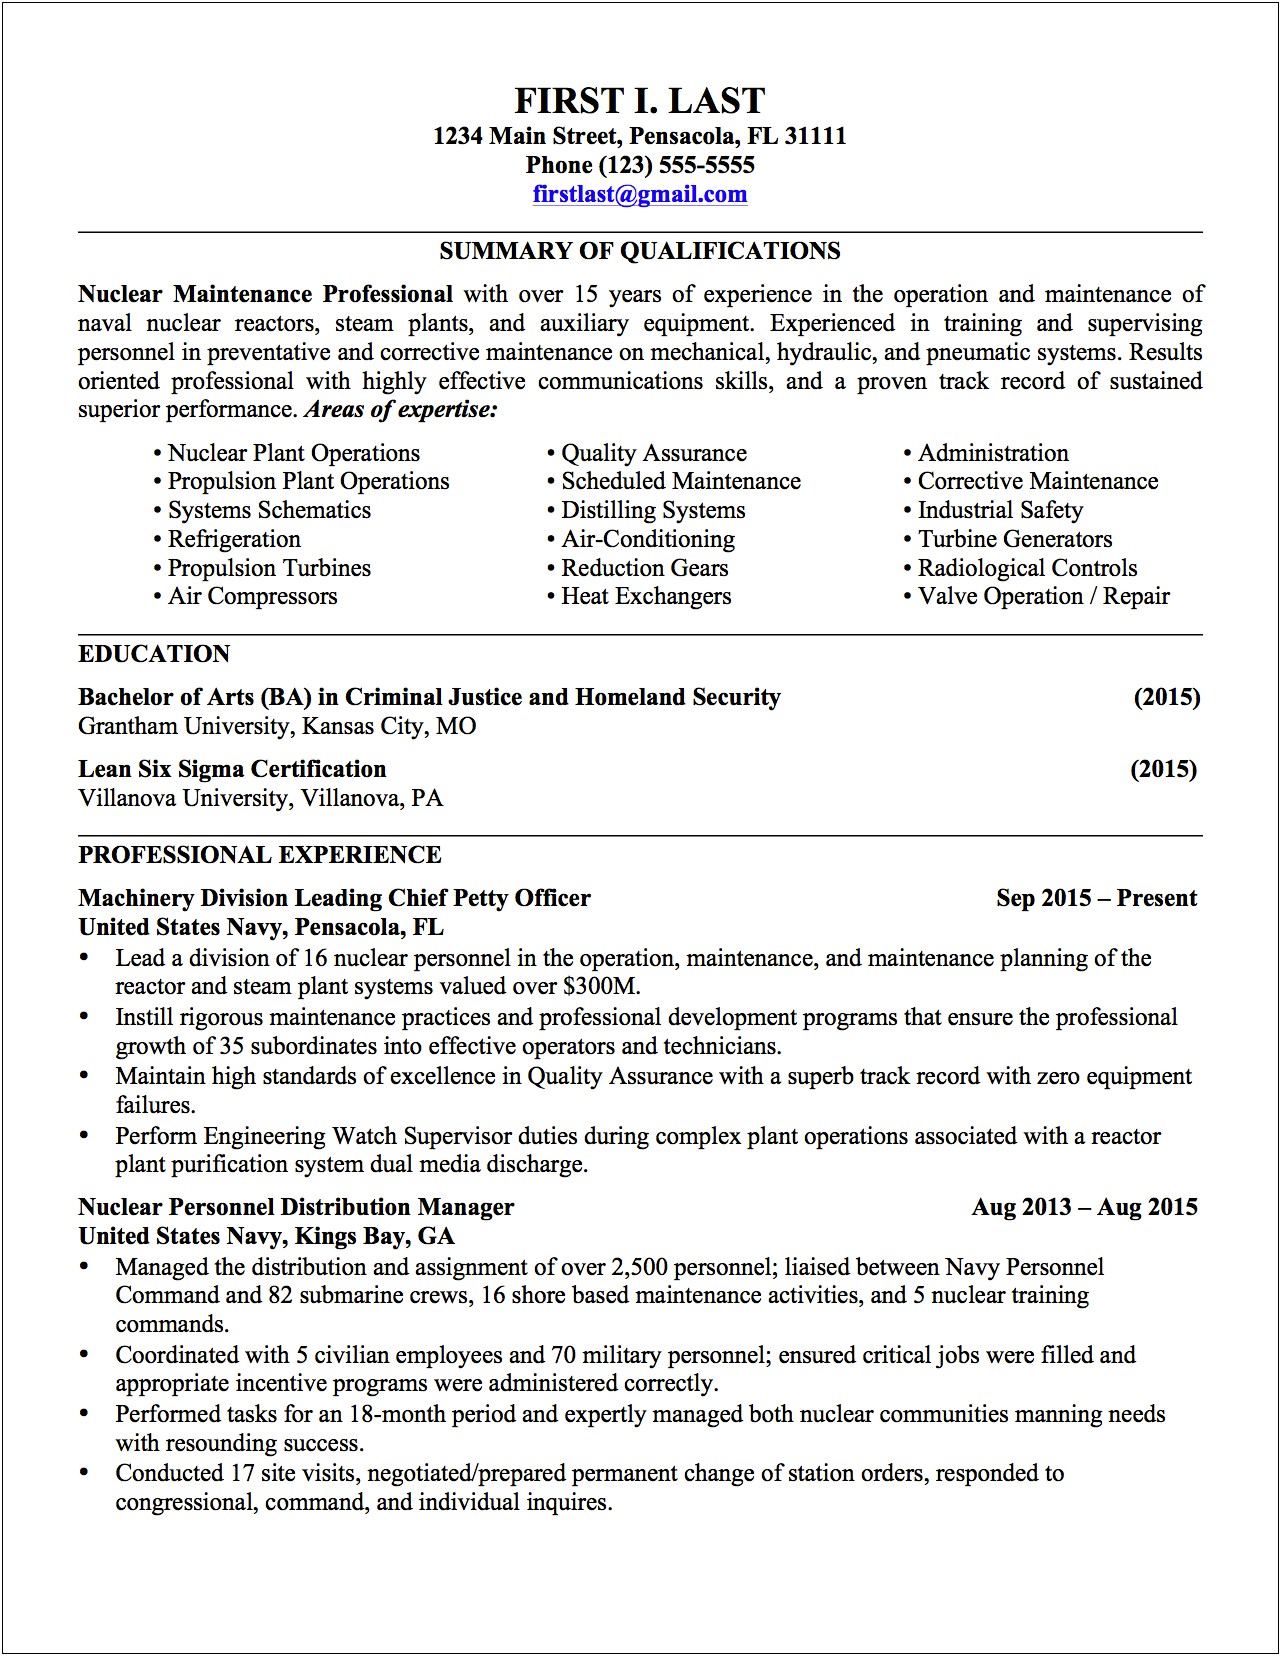 Translating Military Experience To Civilian Employment Resume